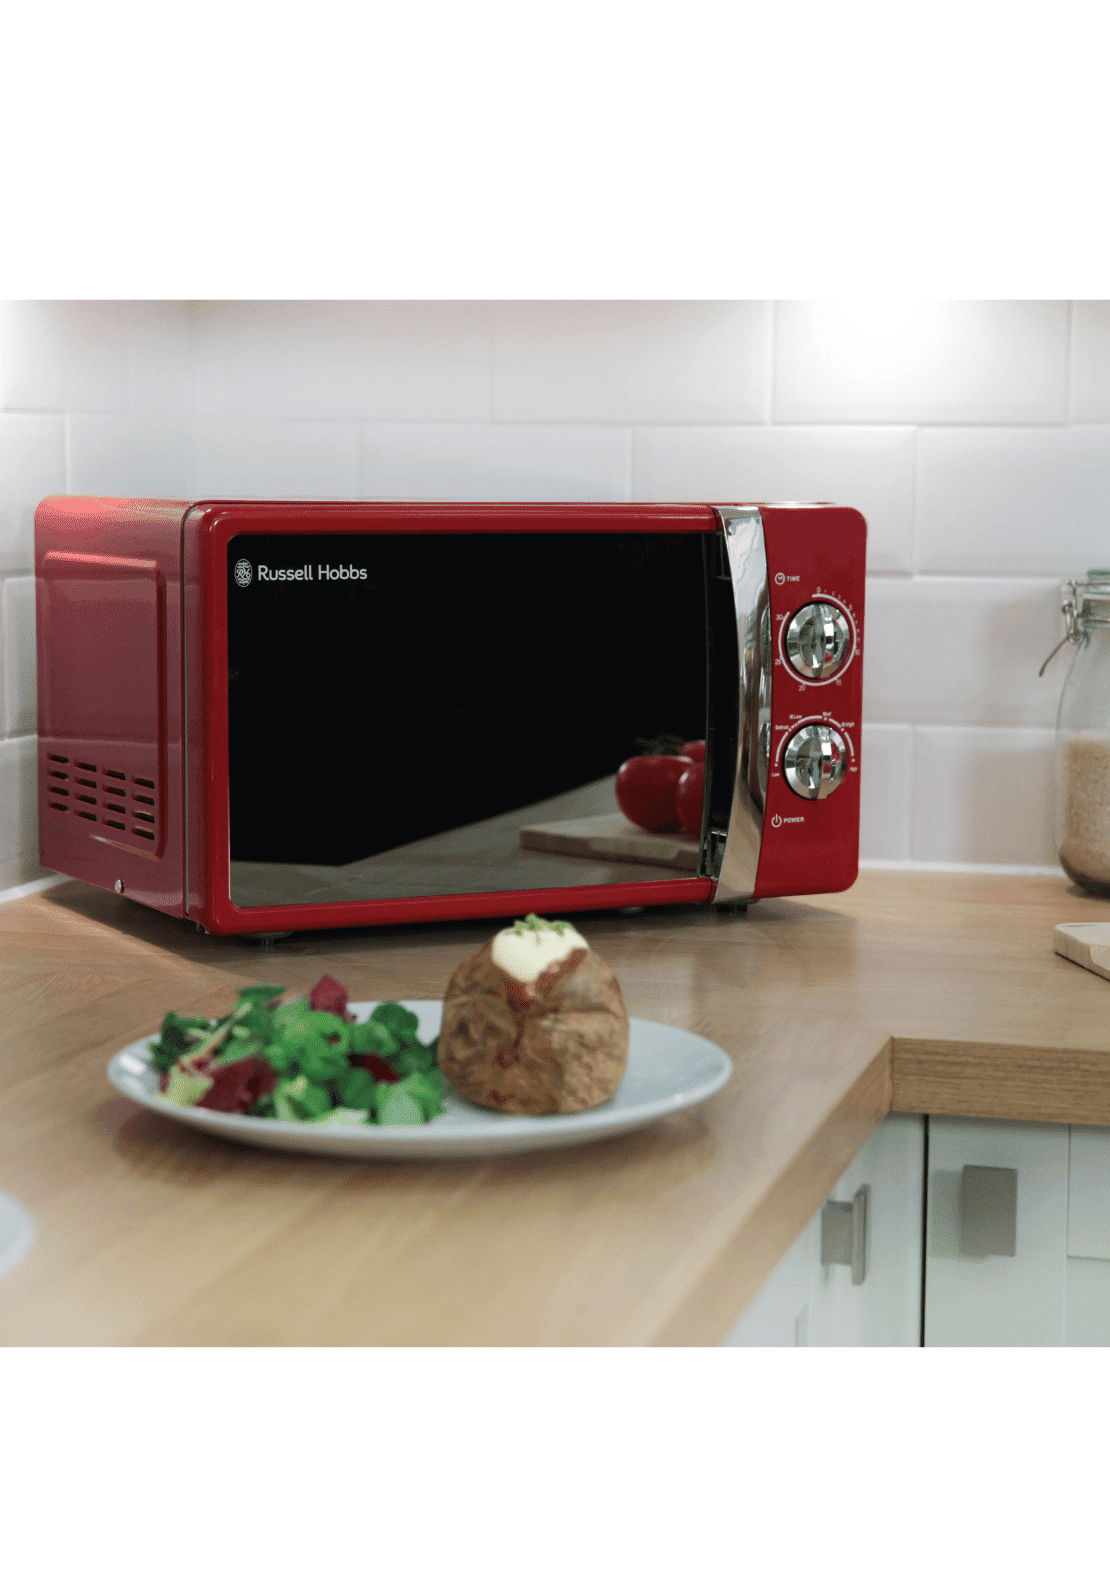 Russell Hobbs Colours Plus Manual Microwave - Red 1 Shaws Department Stores